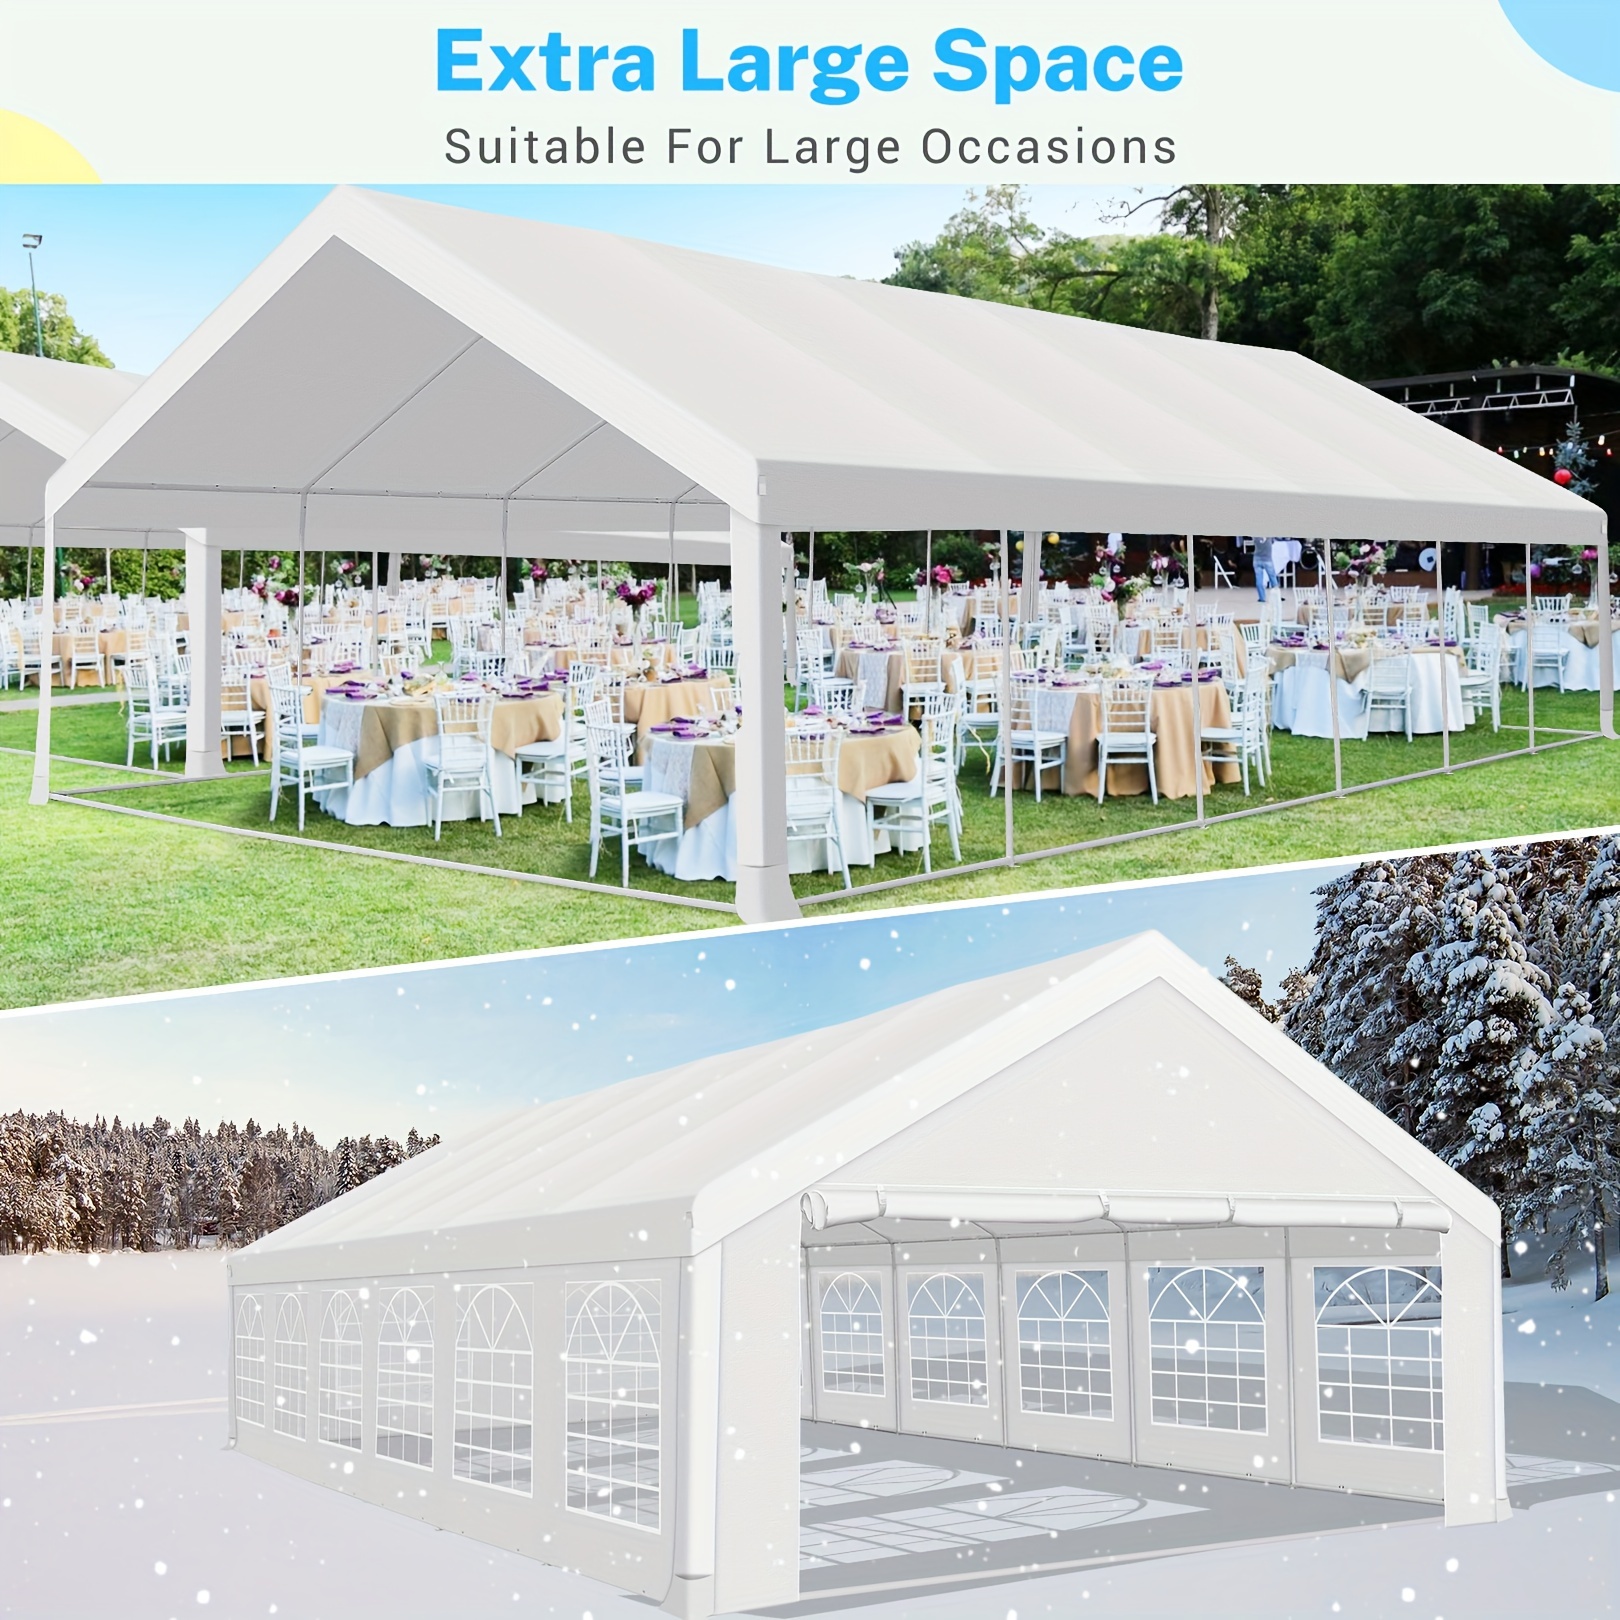 

Tooluck 20' X 40' Heavy Duty Party Tent, Carport Event Tent With Removable Sidewalls, Commercial Outdoor Canopy Wedding Tent